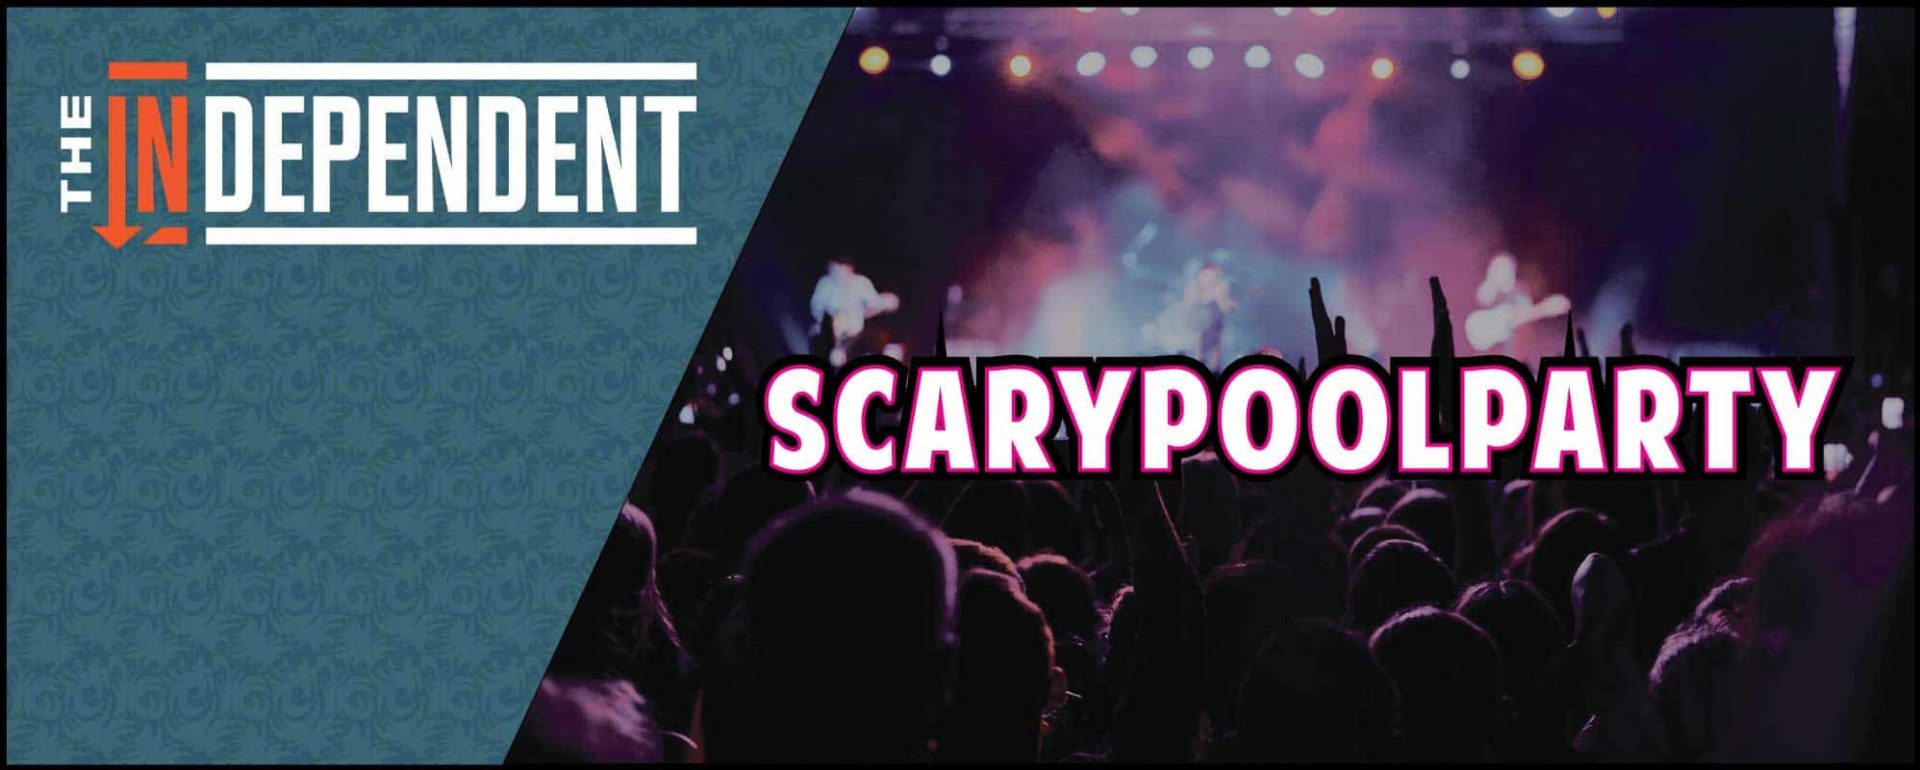 Scary Pool Party at The independent San Francisco